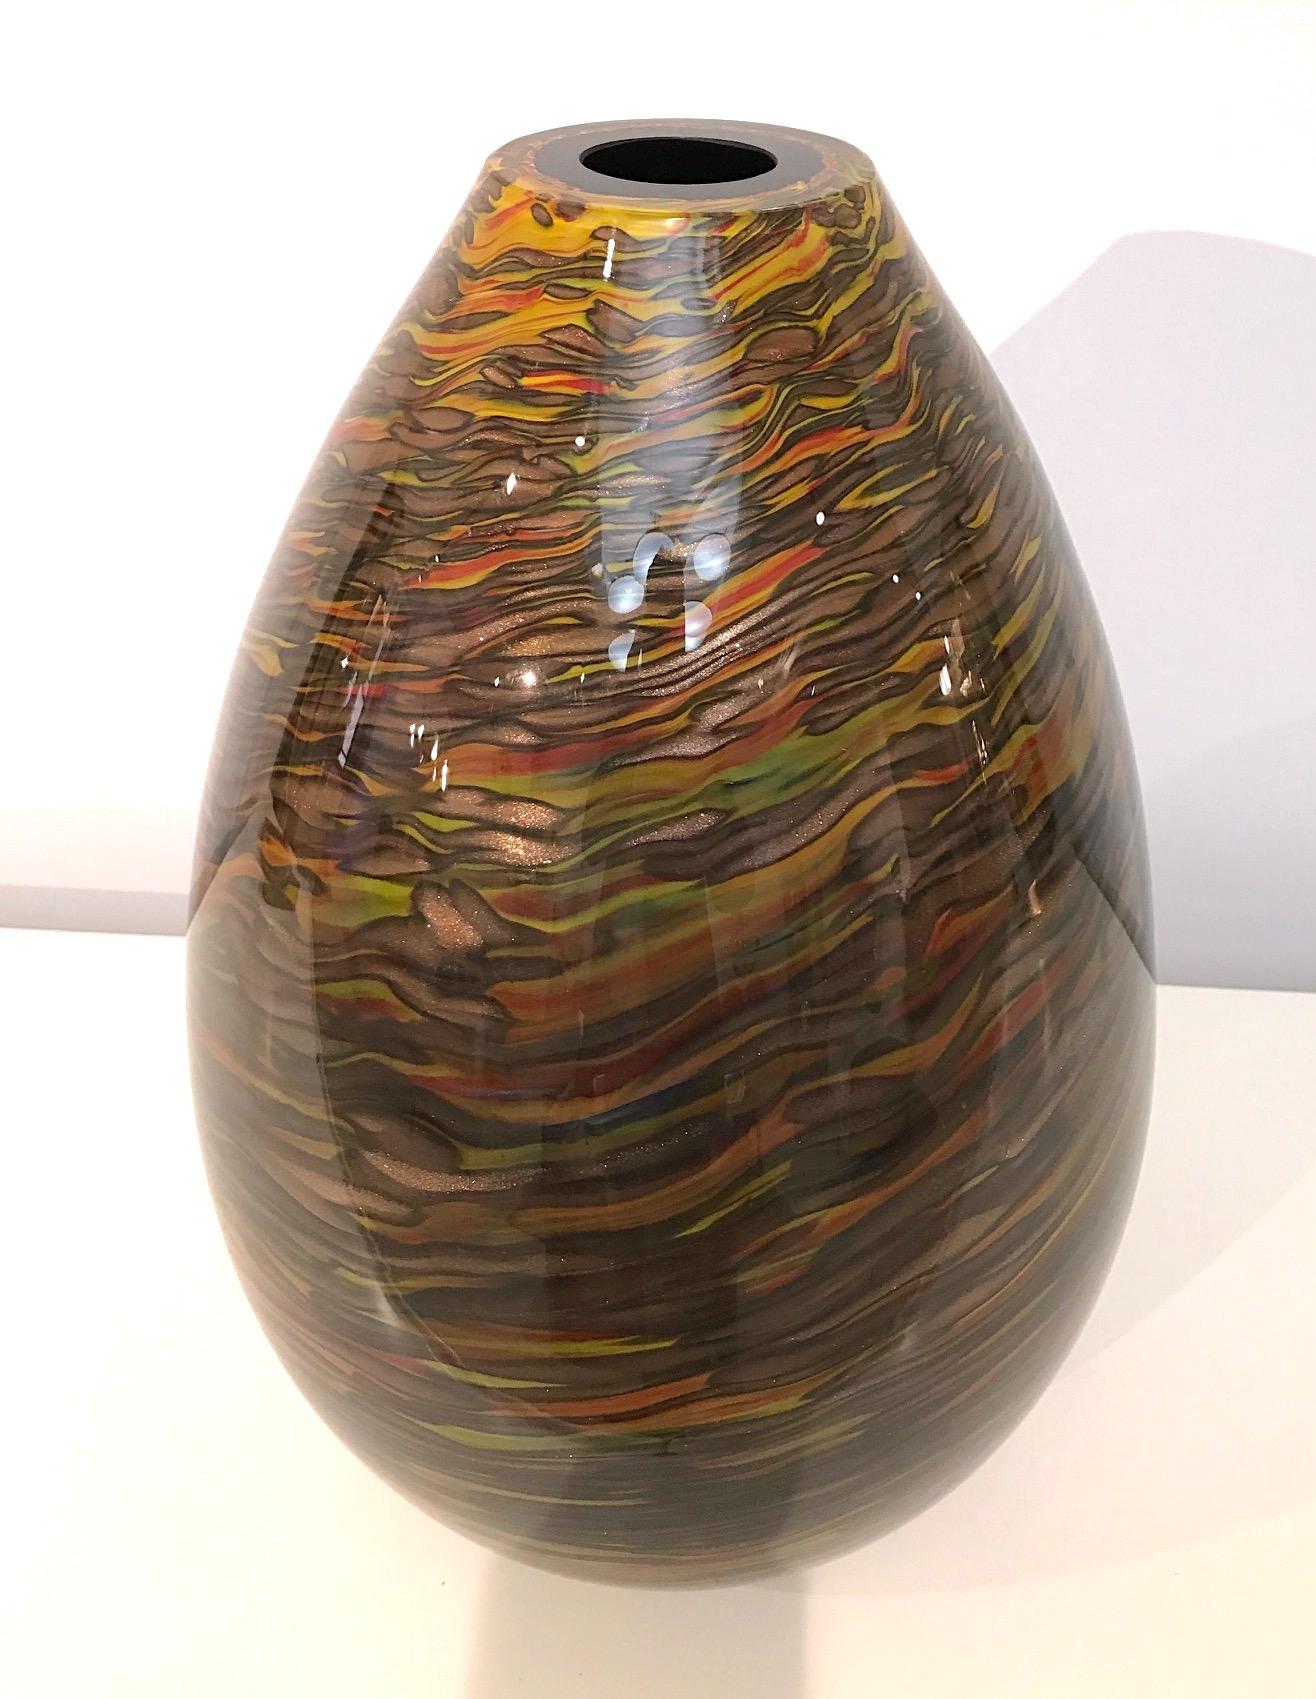 Formia 1980s Modern Ovoid Brown Yellow Red Orange Gold Murano Glass Vase For Sale 8